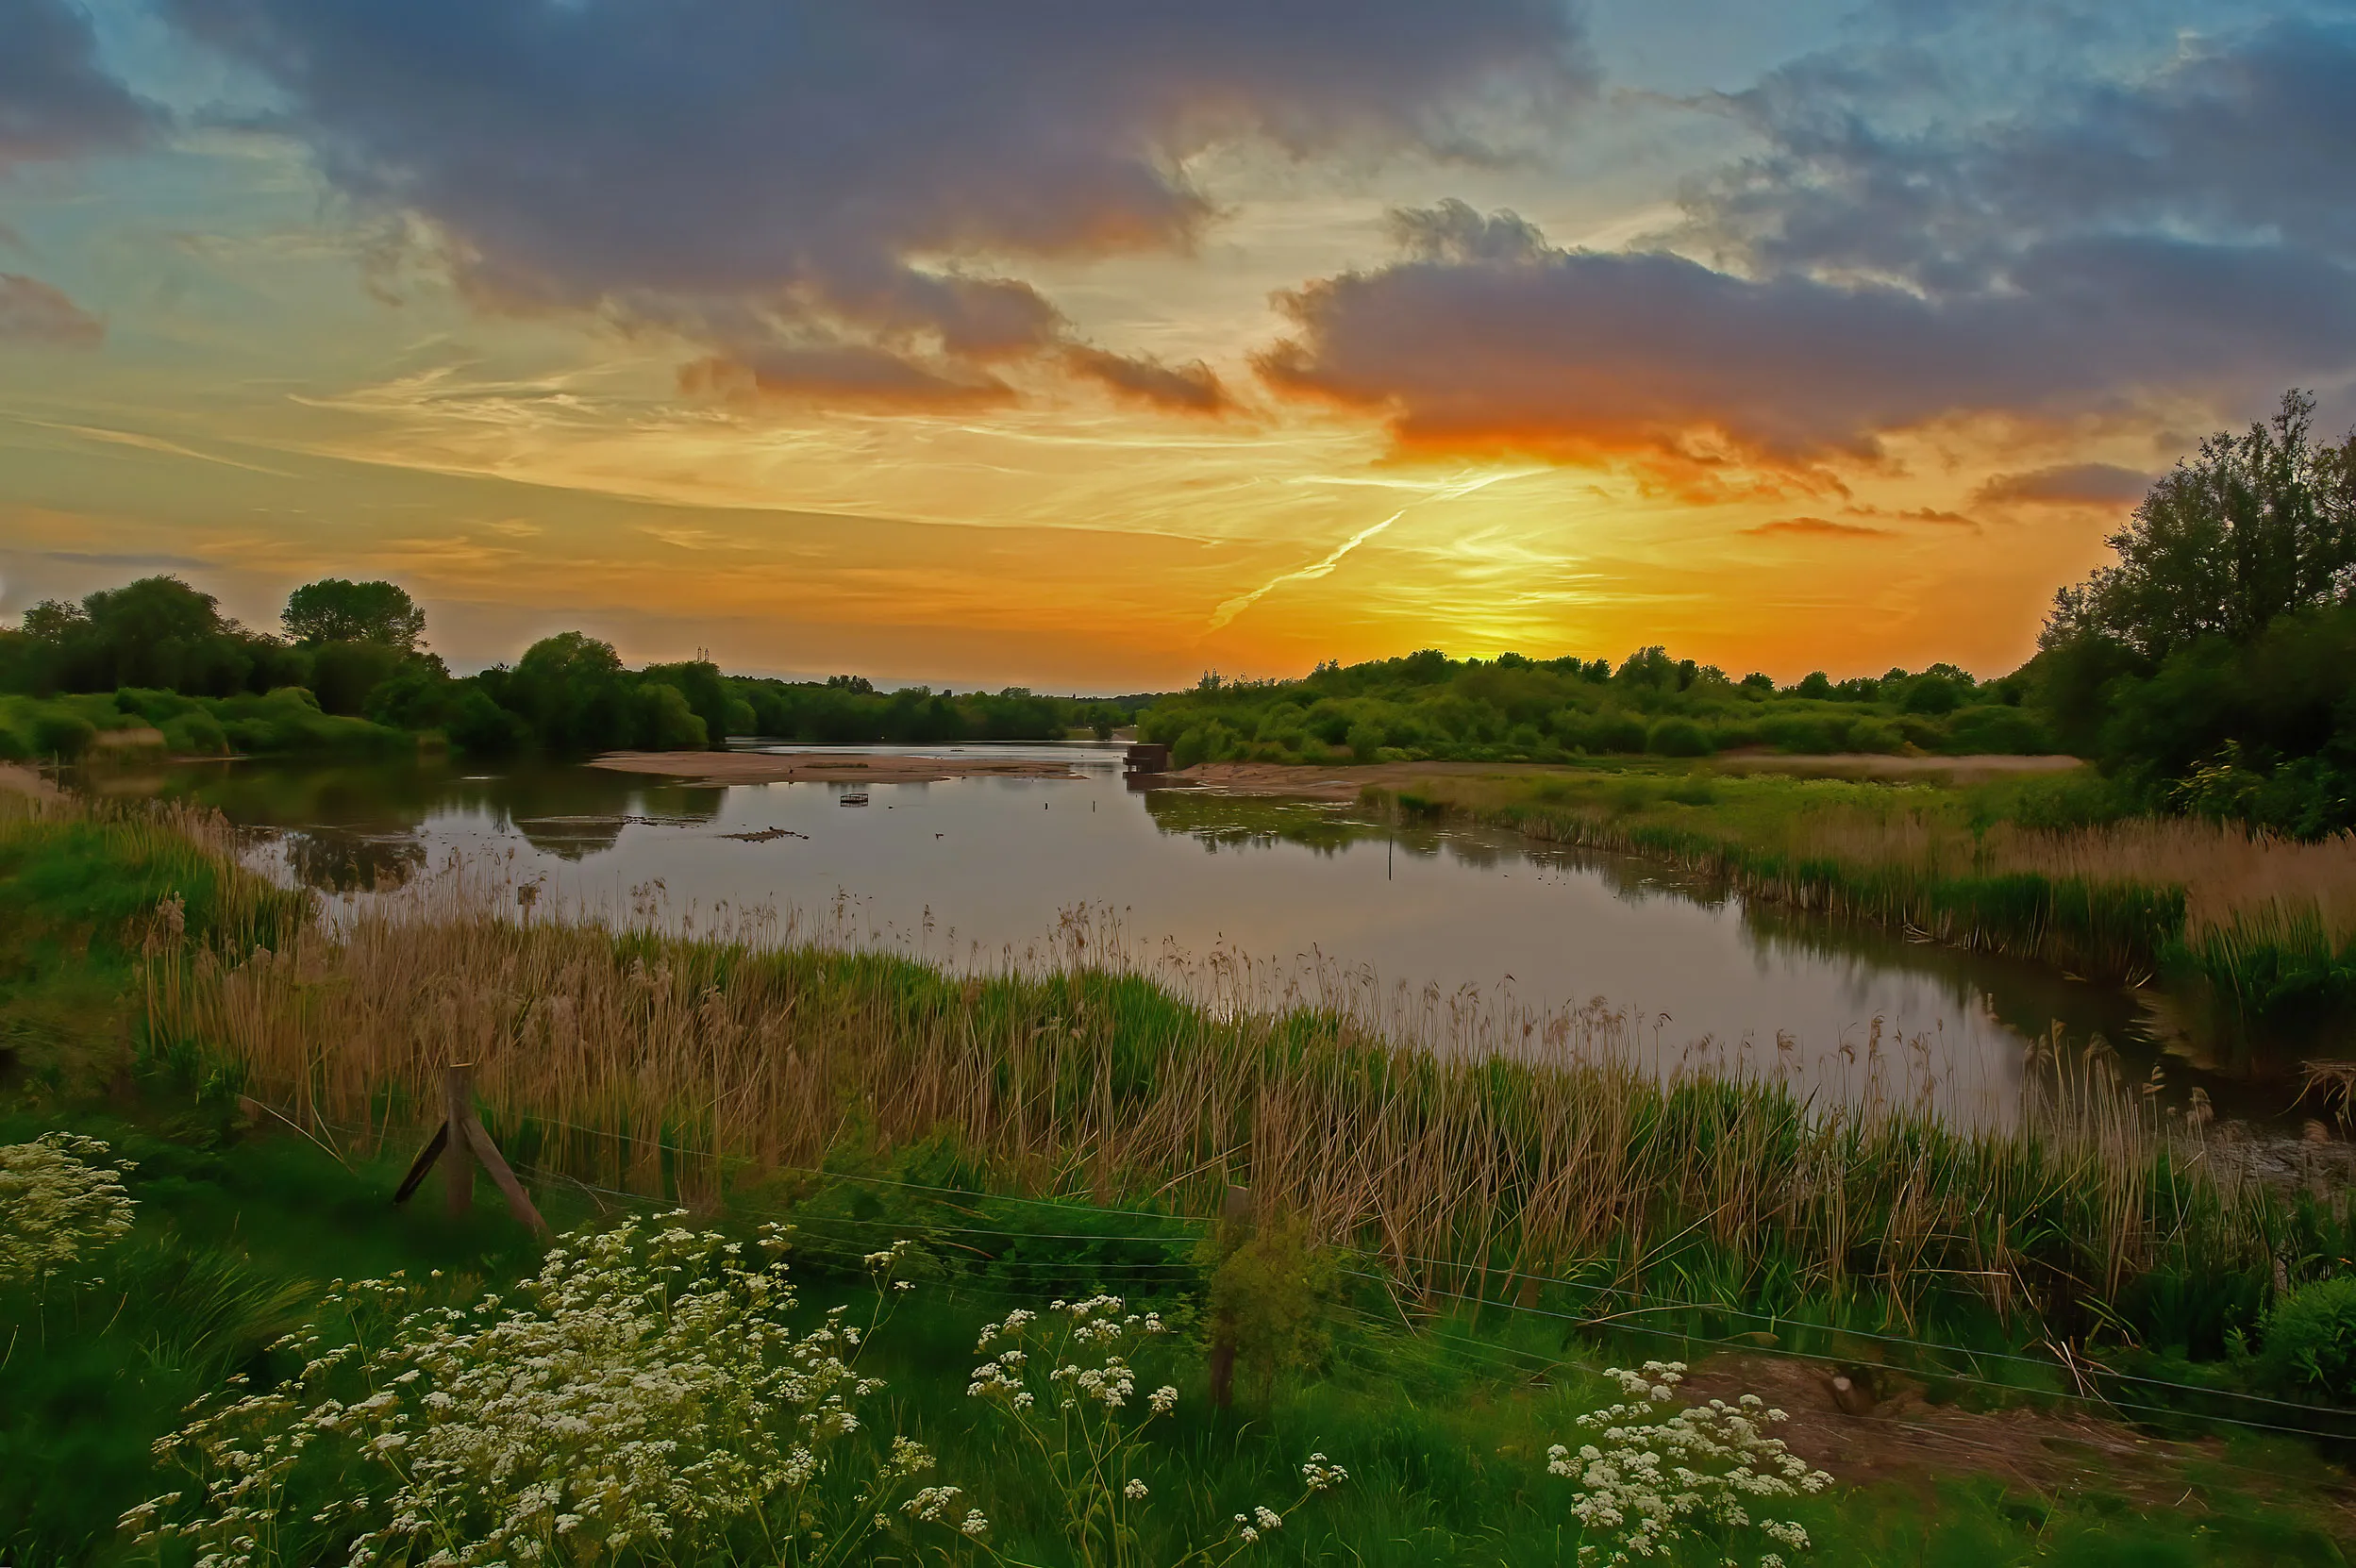 Surrounded by grassland, small white flowers and reedbeds we can see an orange sunset over the lake.